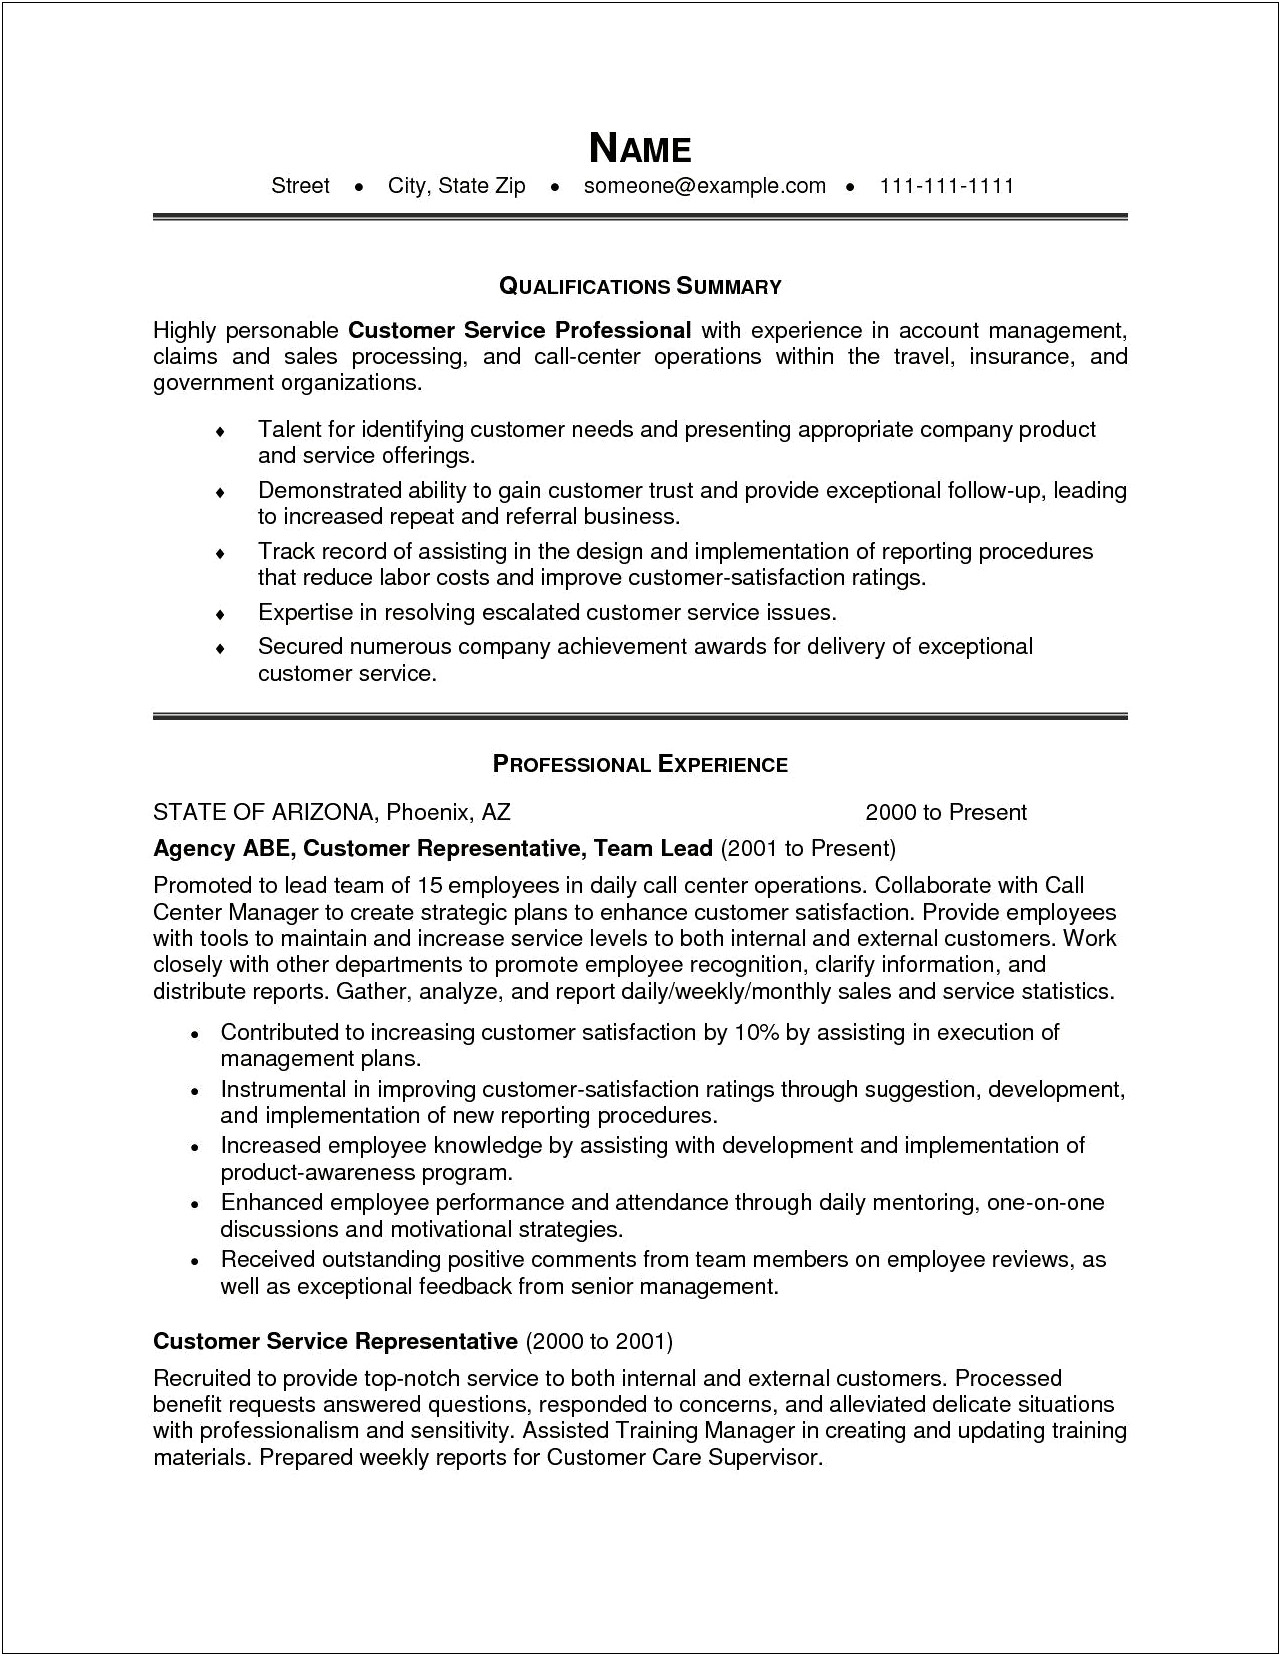 Good Summary For Guest Service Resume